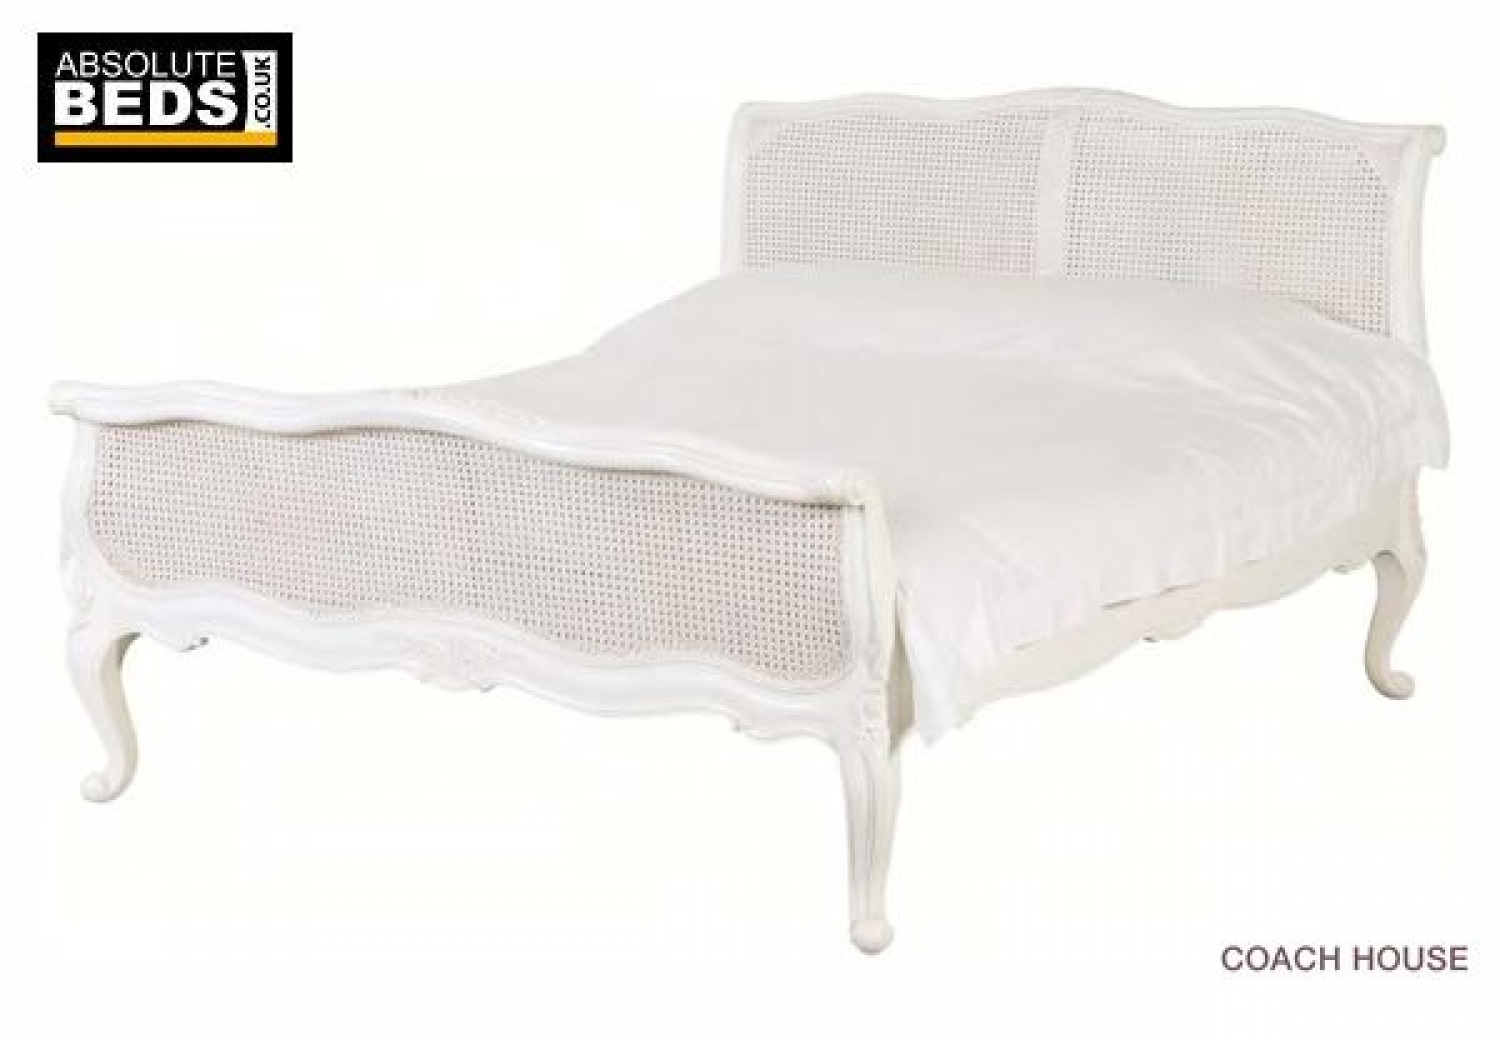 Classichouse chateau painted rattan bed frame. Absolute Beds provides Divan Beds with clever storage Solutions, Beds and Mattresses lowest prices and top brands image